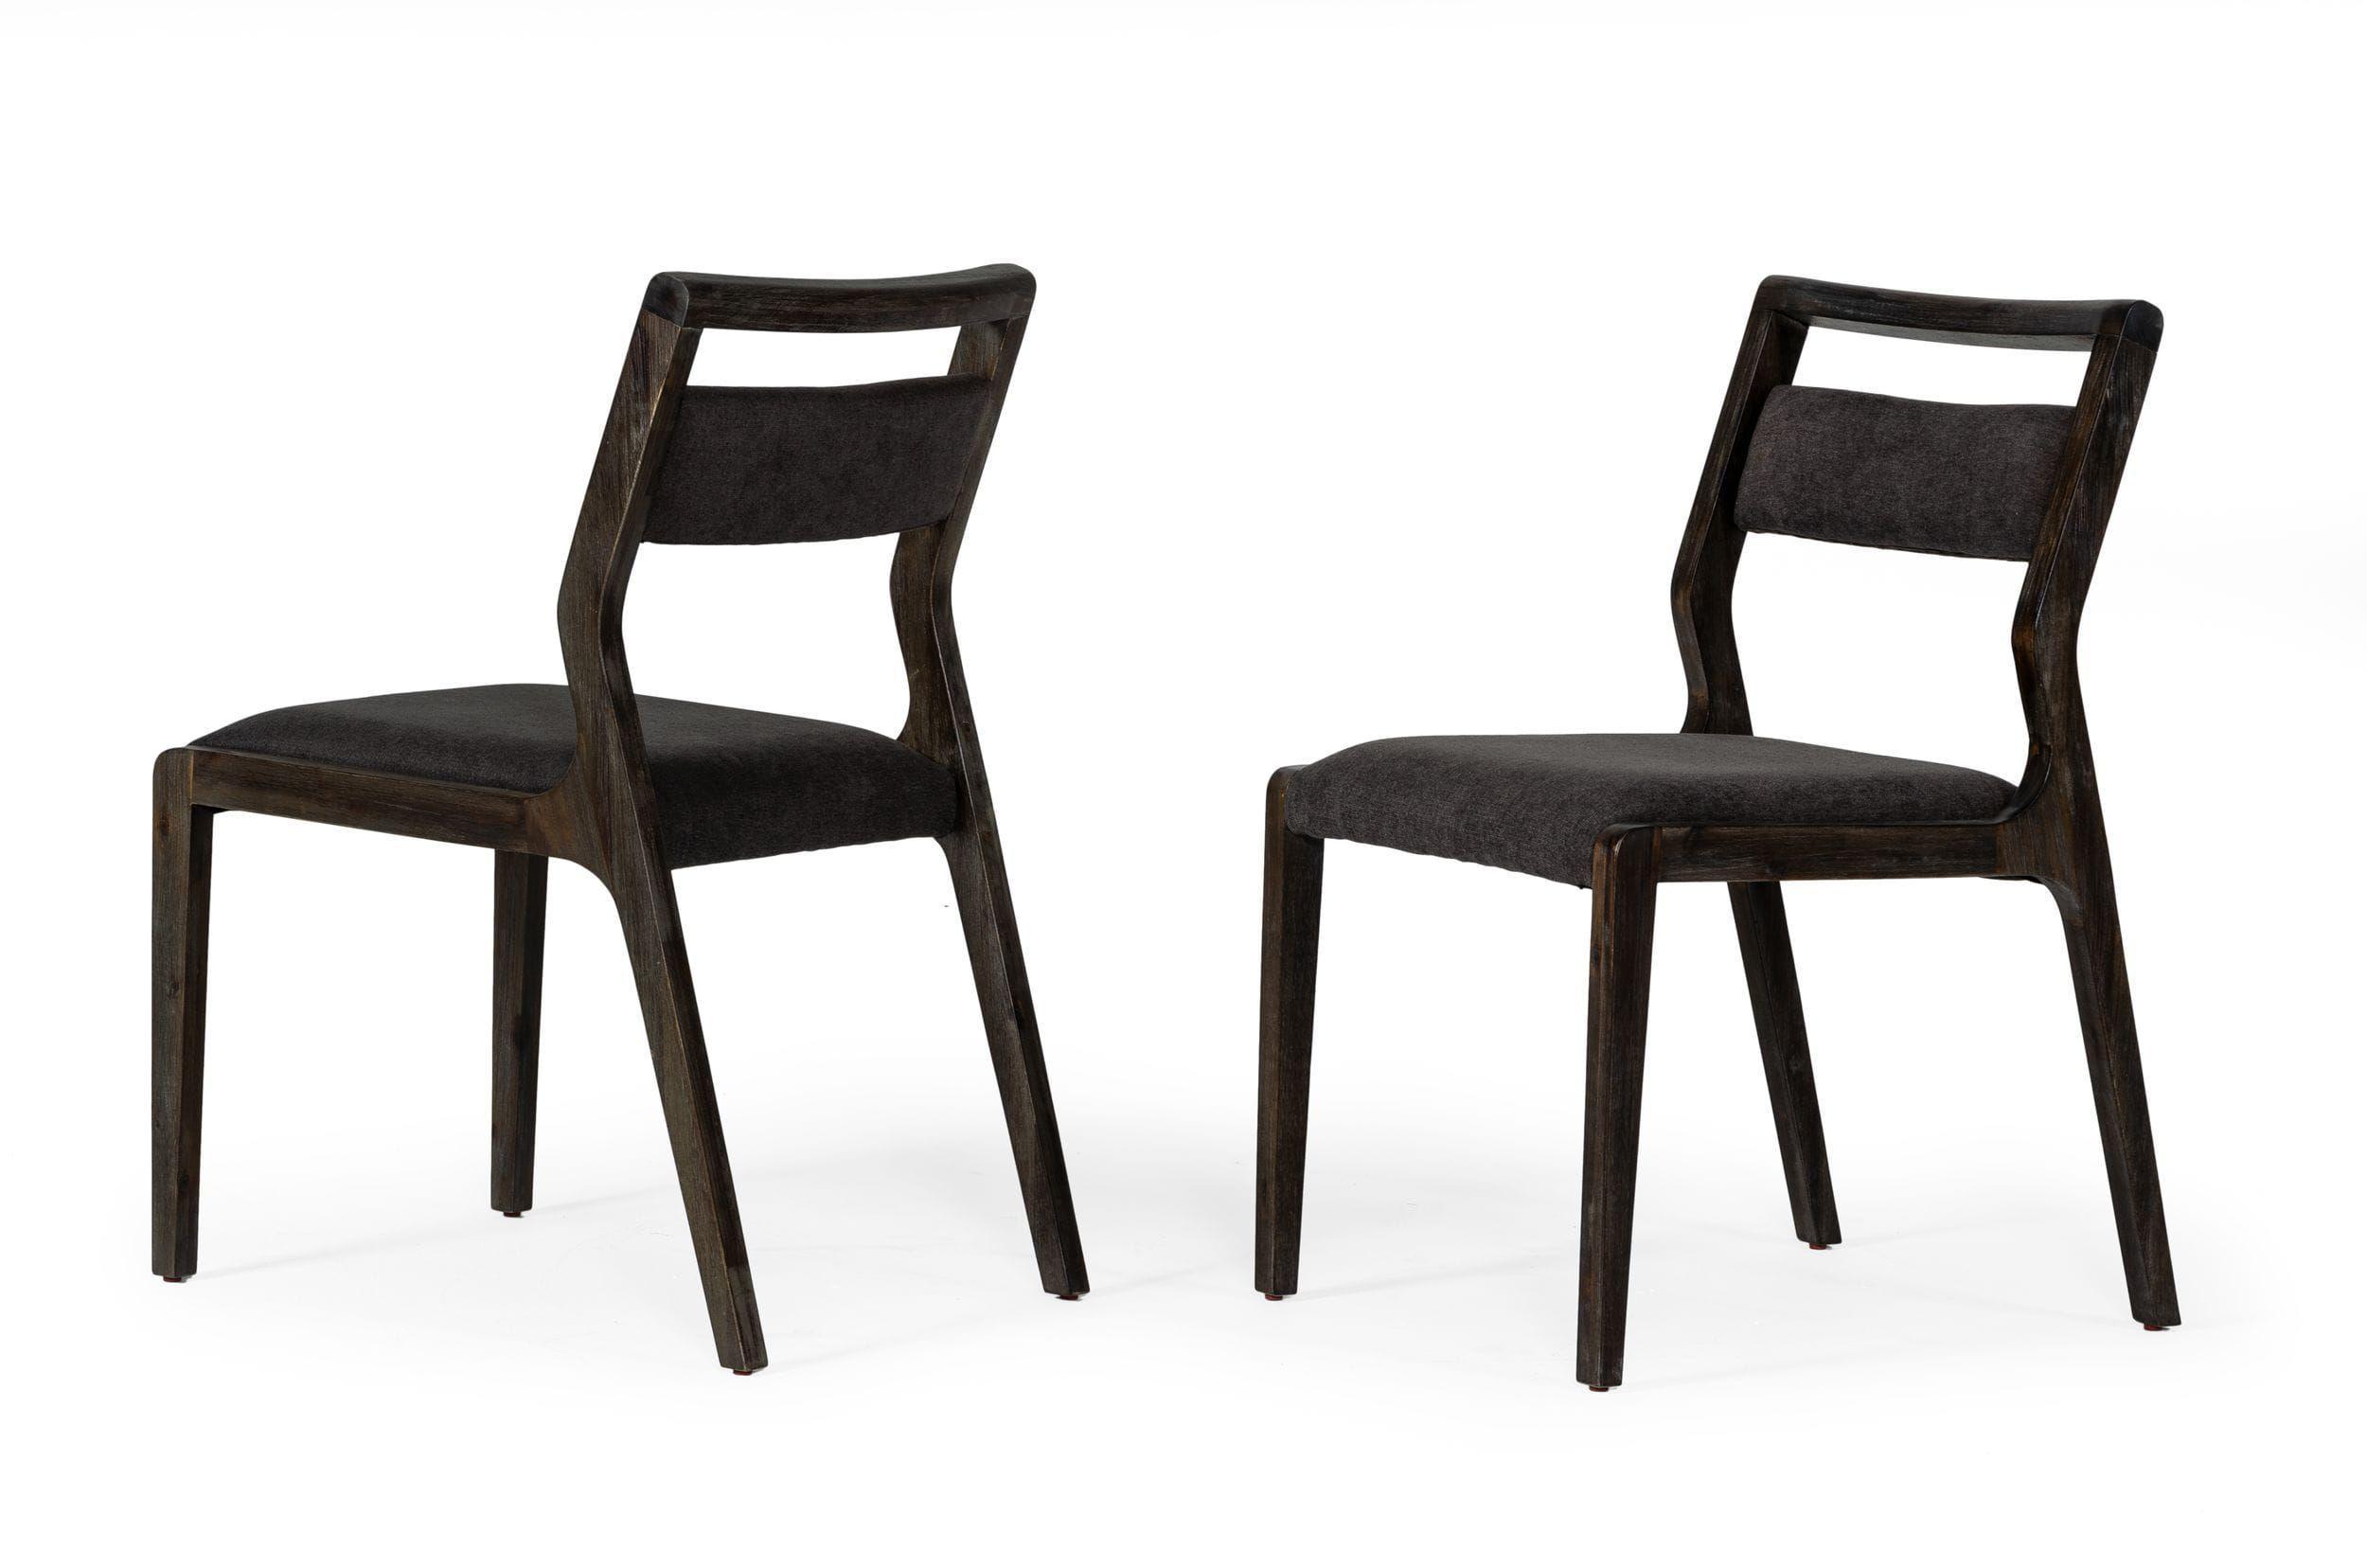 Contemporary, Modern Dining Chair Set VGMABR-99-CHEST VGWDSTHL-UPHDC-SANTI-2pcs in Brown Fabric